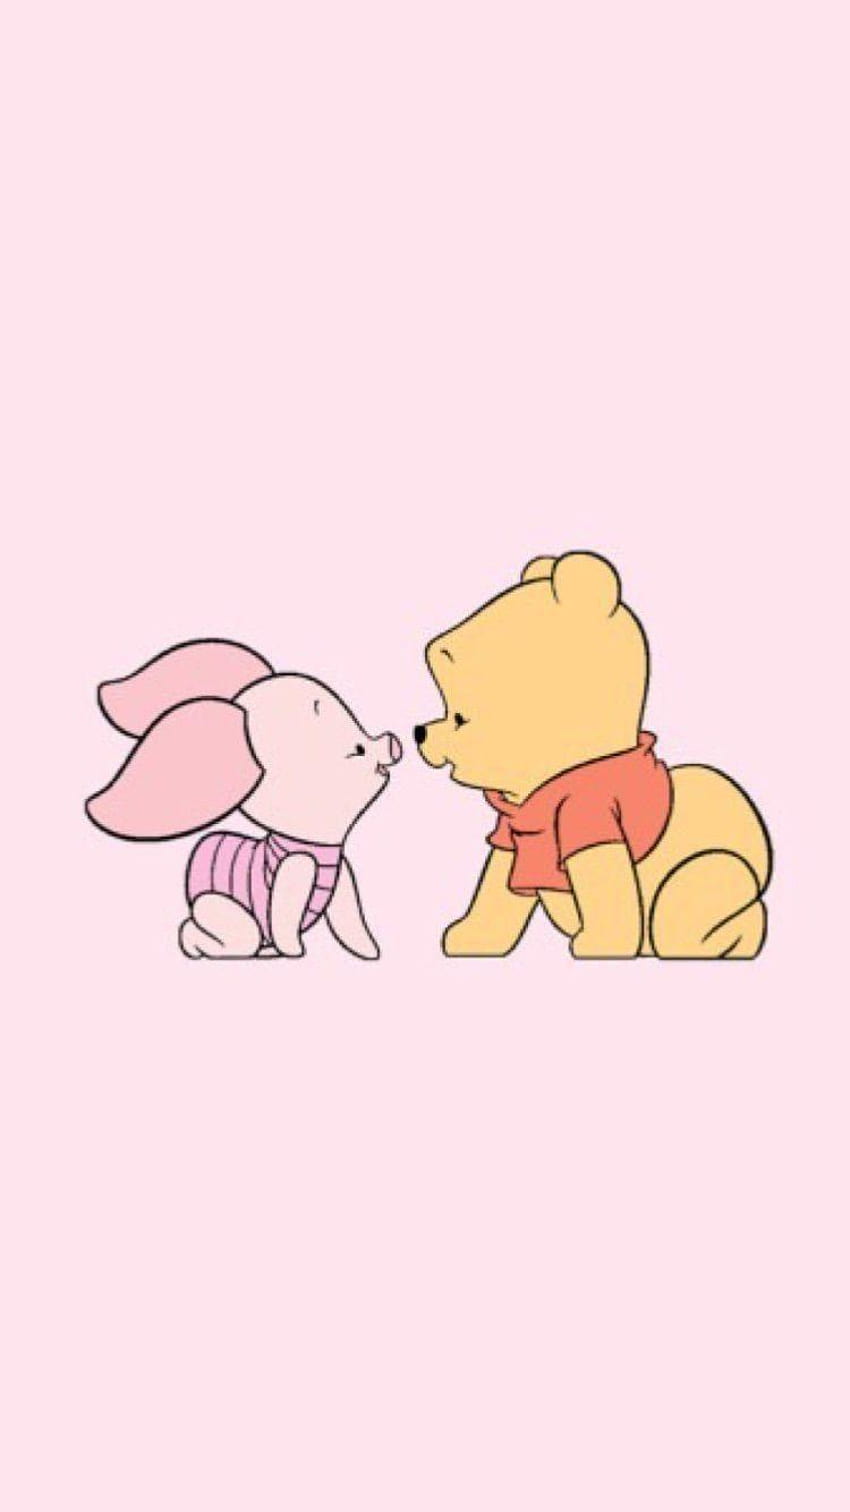 Sad Aesthetic Winnie The Pooh Wallpaper Download  MobCup